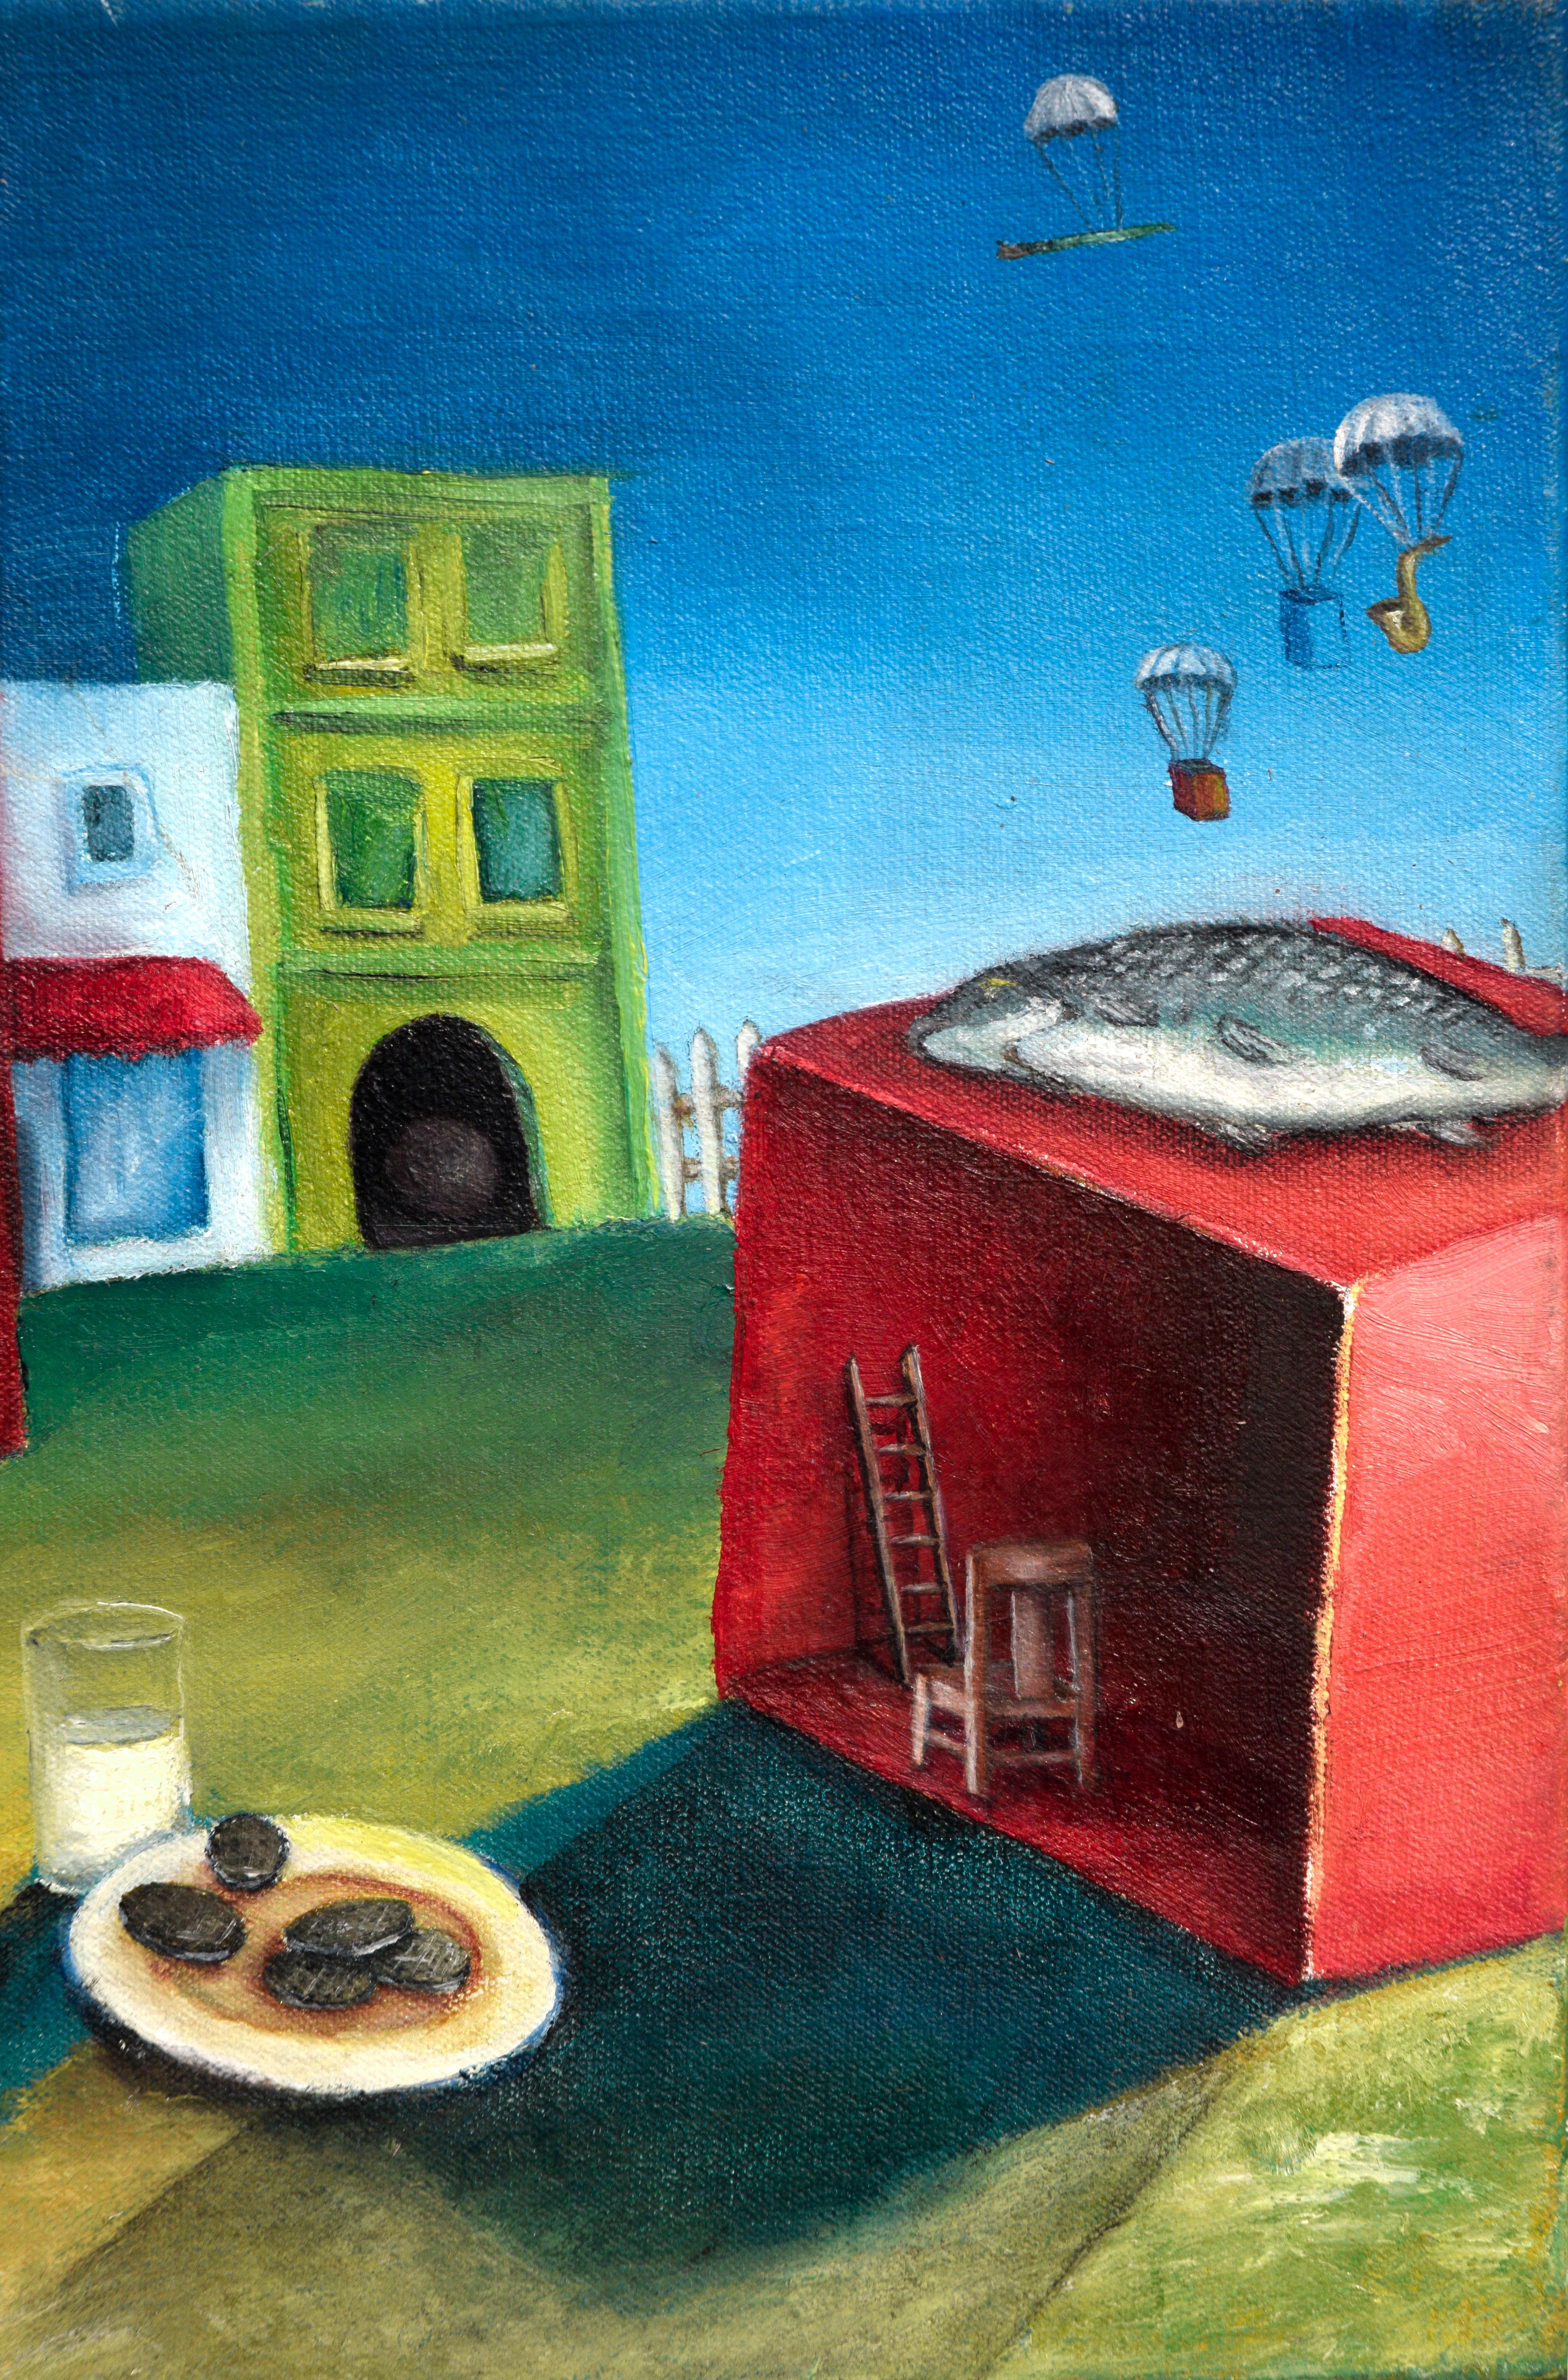 Surreal Figurative Landscape with Milk and Cookies - Surrealist Painting by David Musser